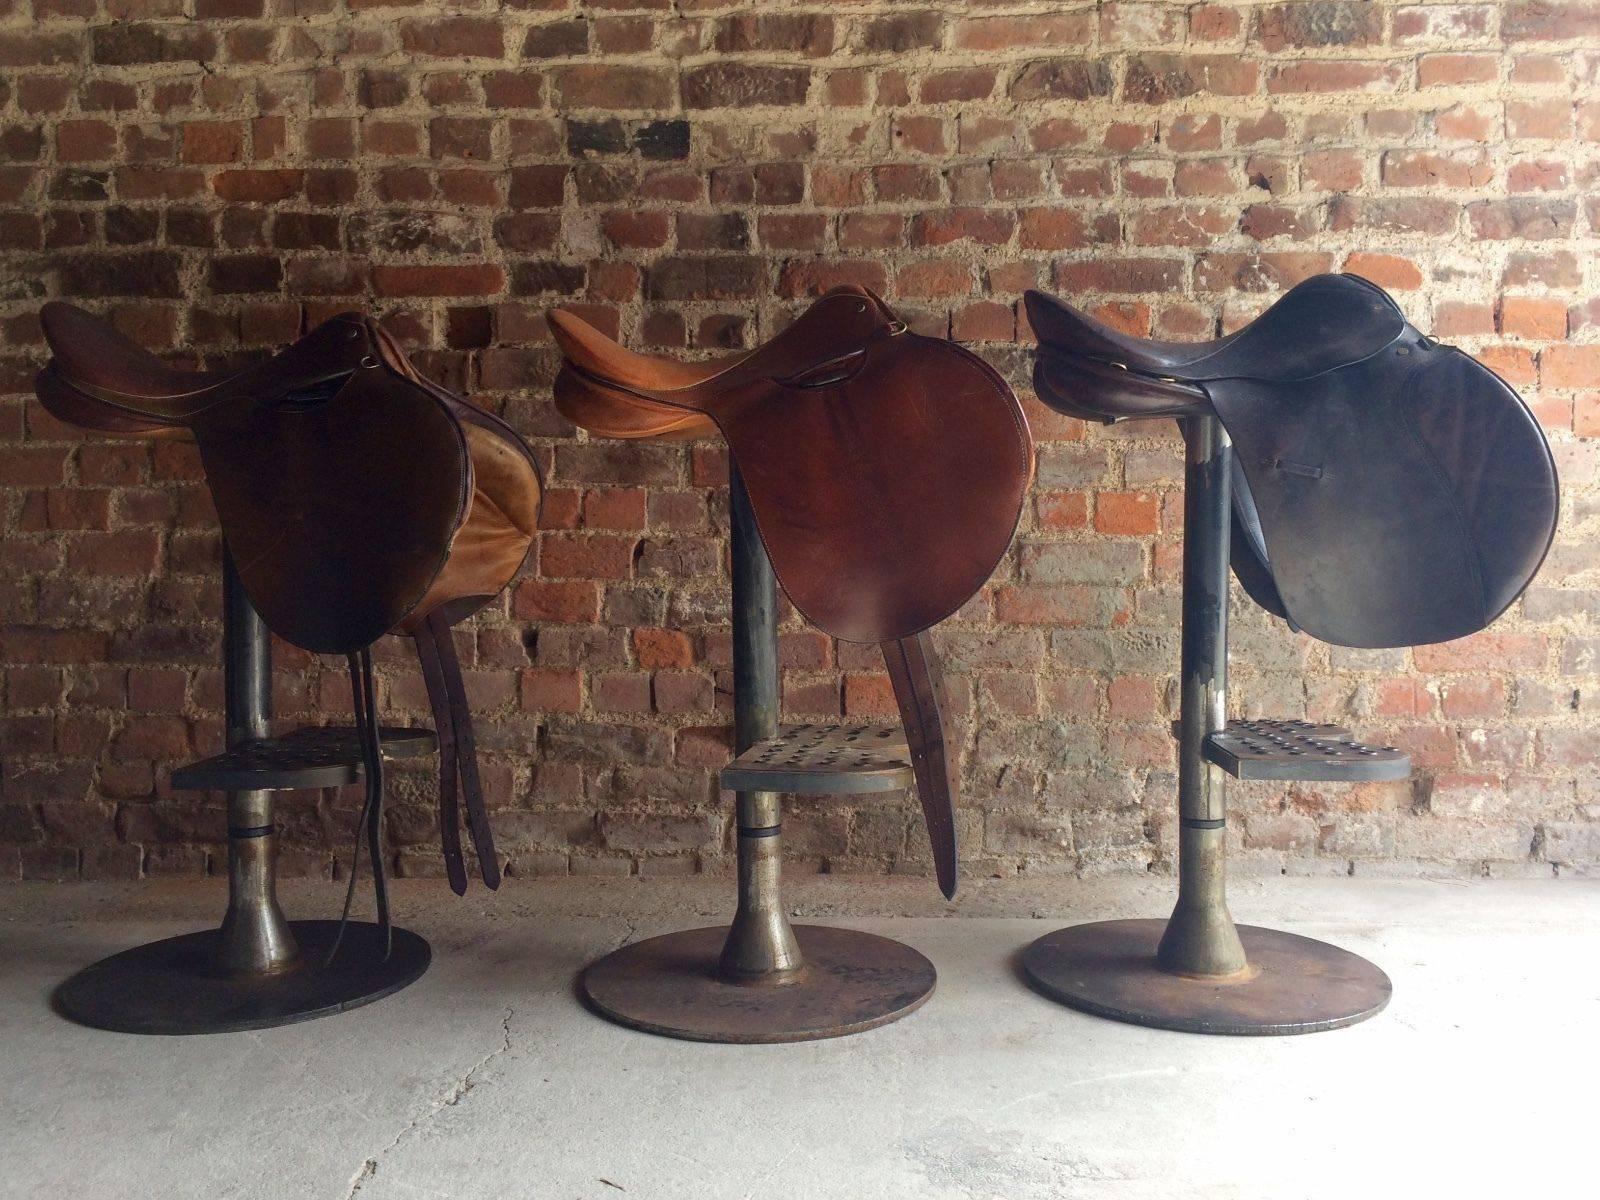 A beautiful set of three Industrial style leather and steel horse bar stools, each saddle is a slightly different shade of brown leather, extremely comfortable and very unique, look amazing!

Please note: I also have a fourth matching stool but